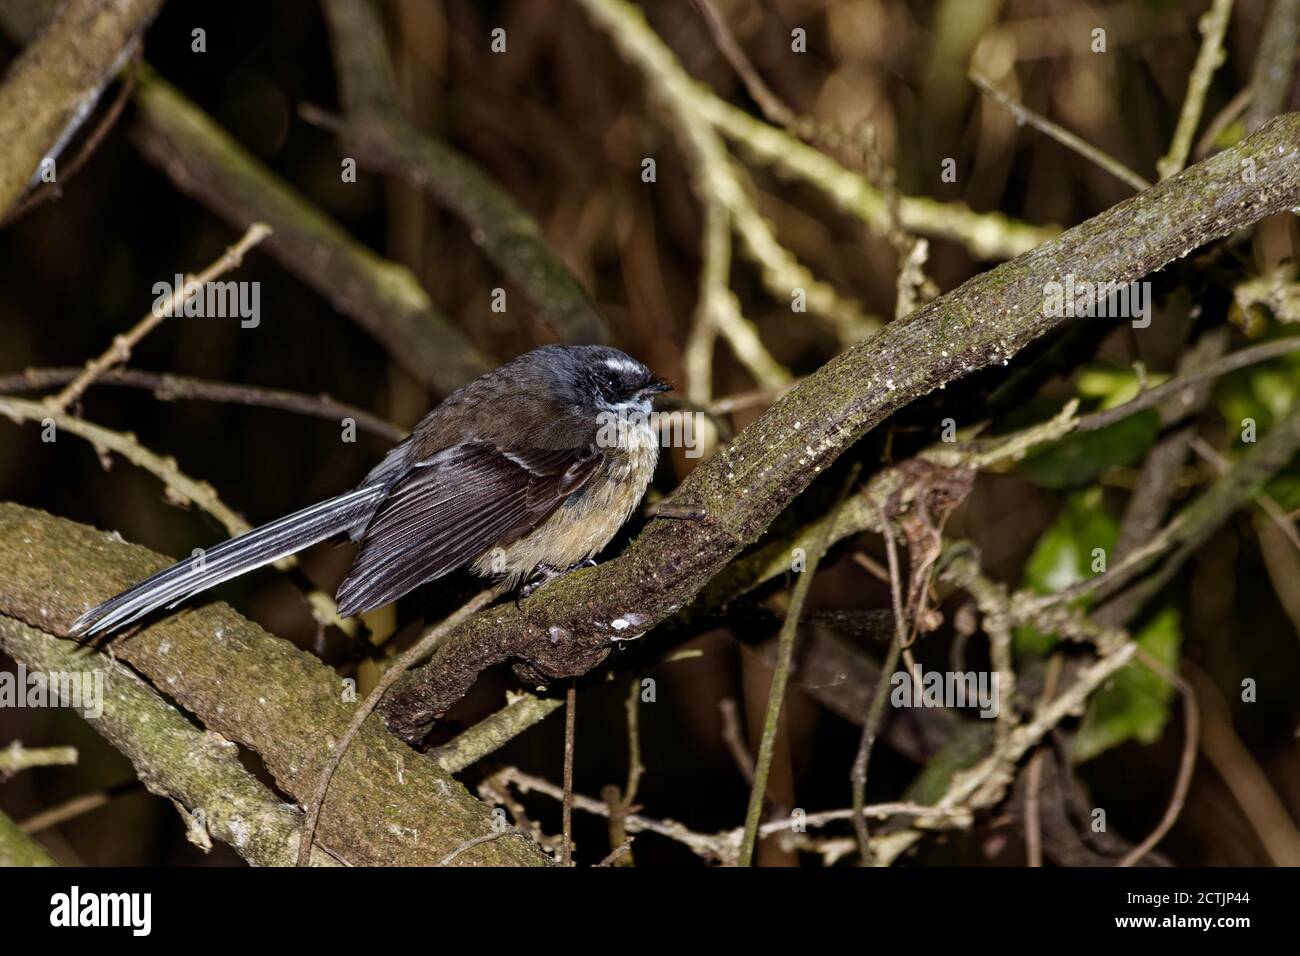 The New Zealand fantail (Rhipidura fuliginosa) is a small insectivorous bird, the only species of fantail in New Zealand. Stock Photo